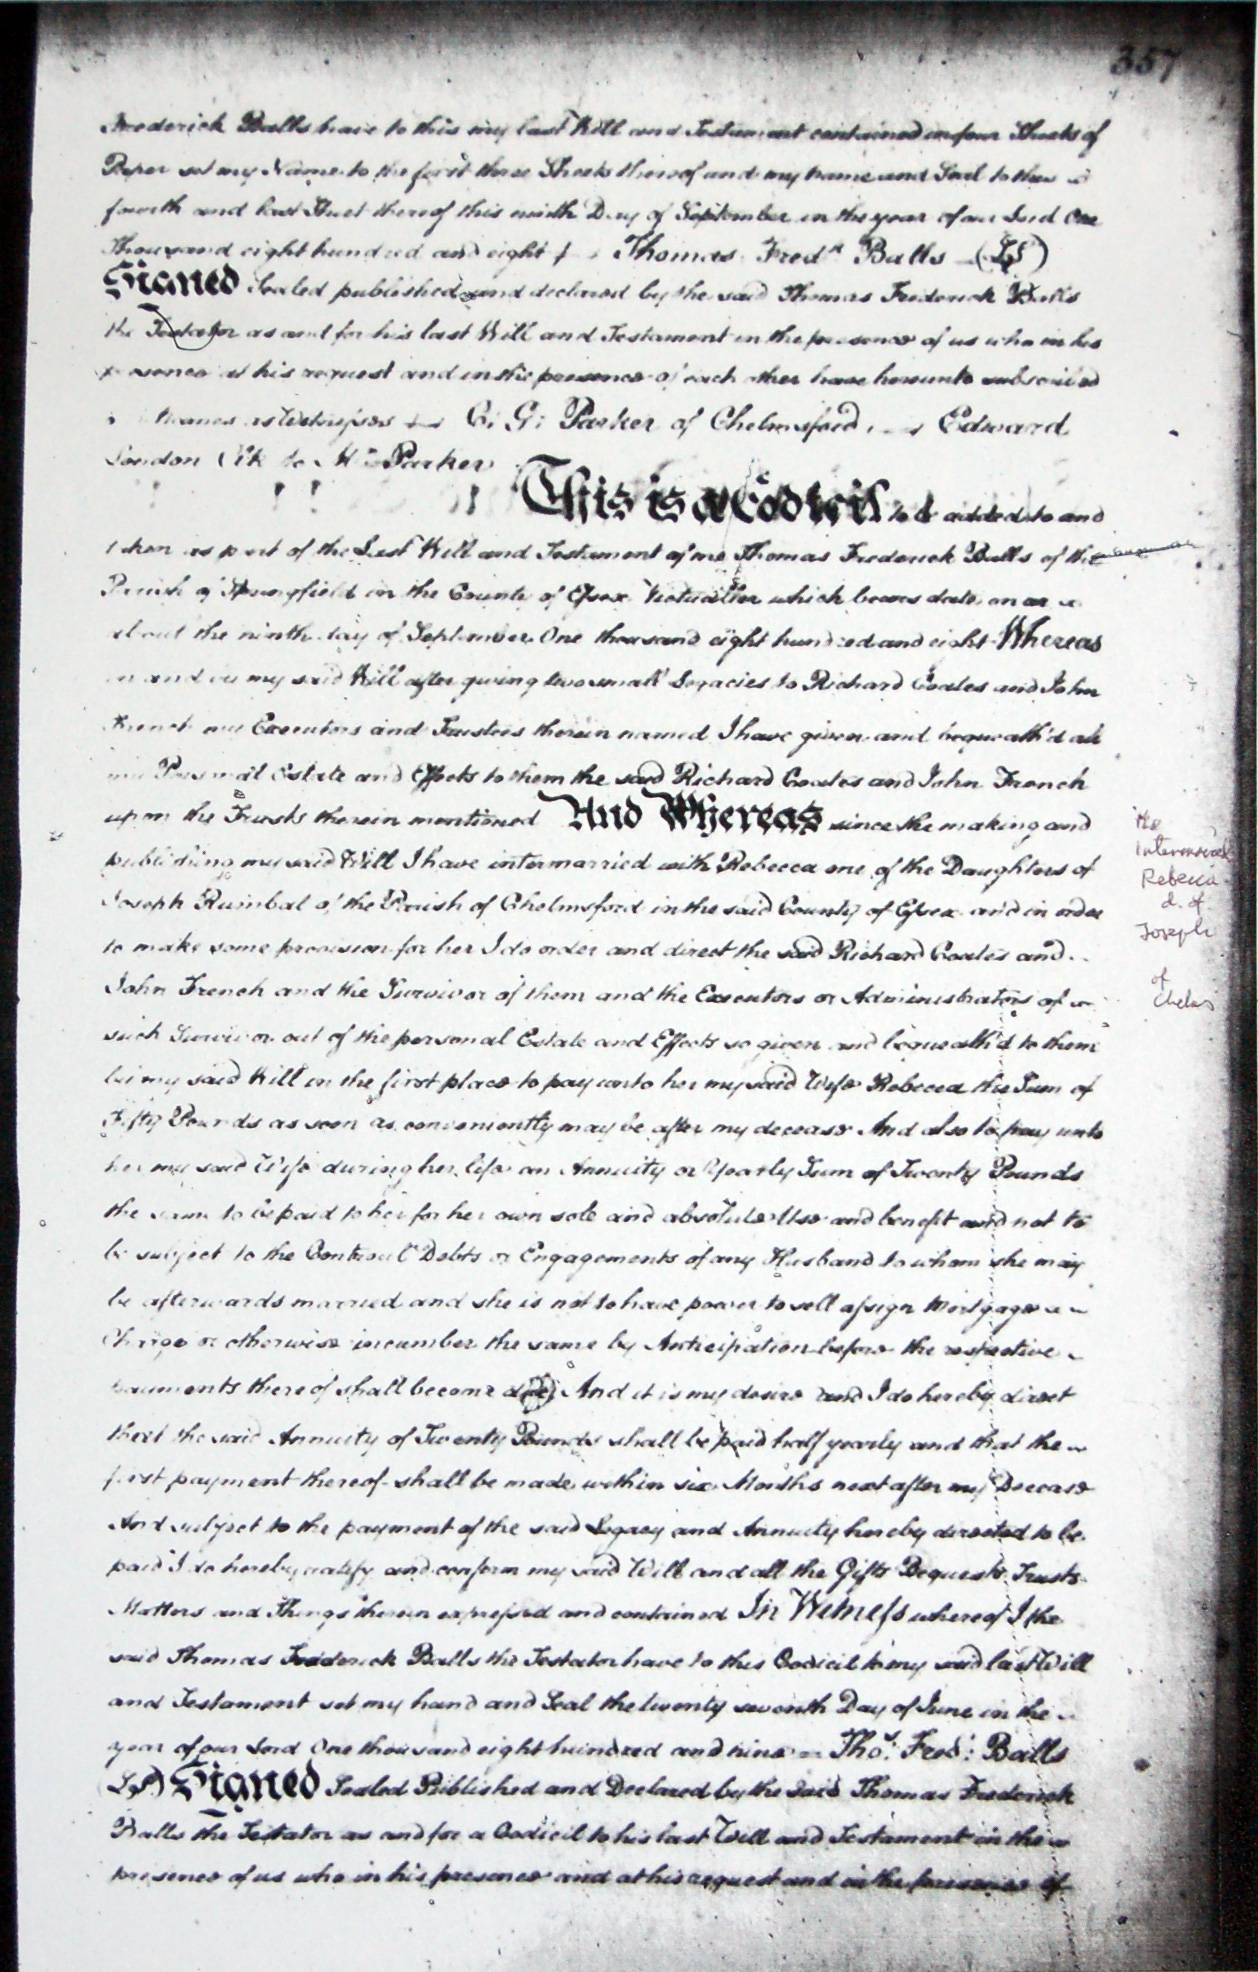 The will of Thomas Frederick Balls proved in 1810, page 4 in which a codicil was added due to Thomas intermarrying with Rebecca, one of the daughters of Joseph Rumball of Chelmsford